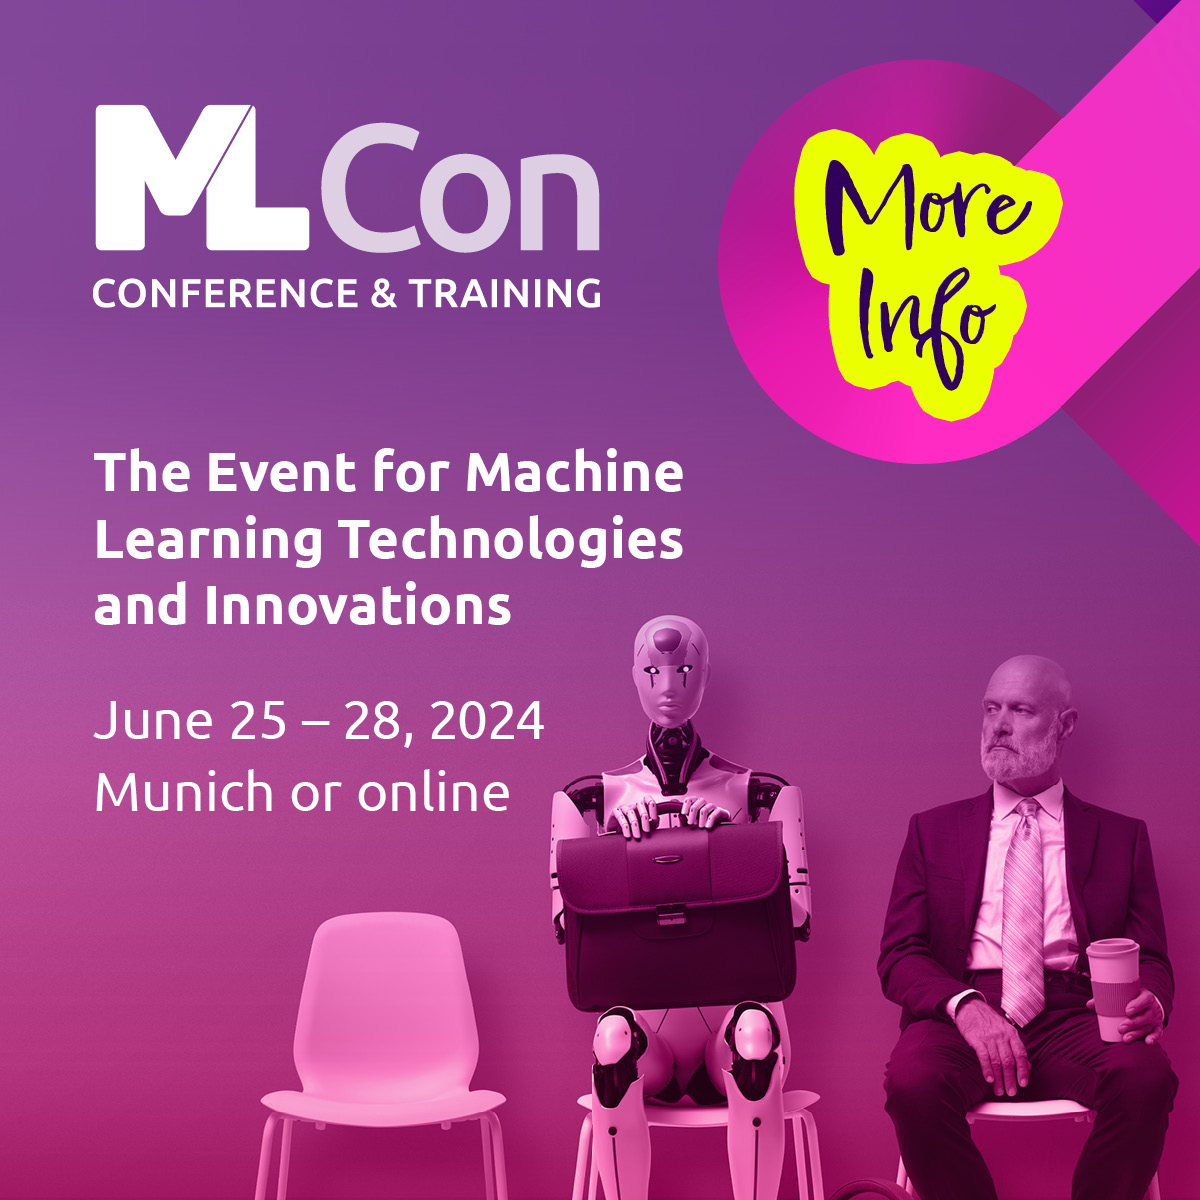 MLCon - The Event for Machine Learning Technologies & Innovations
June 25 – 28, 2024 | Munich or online